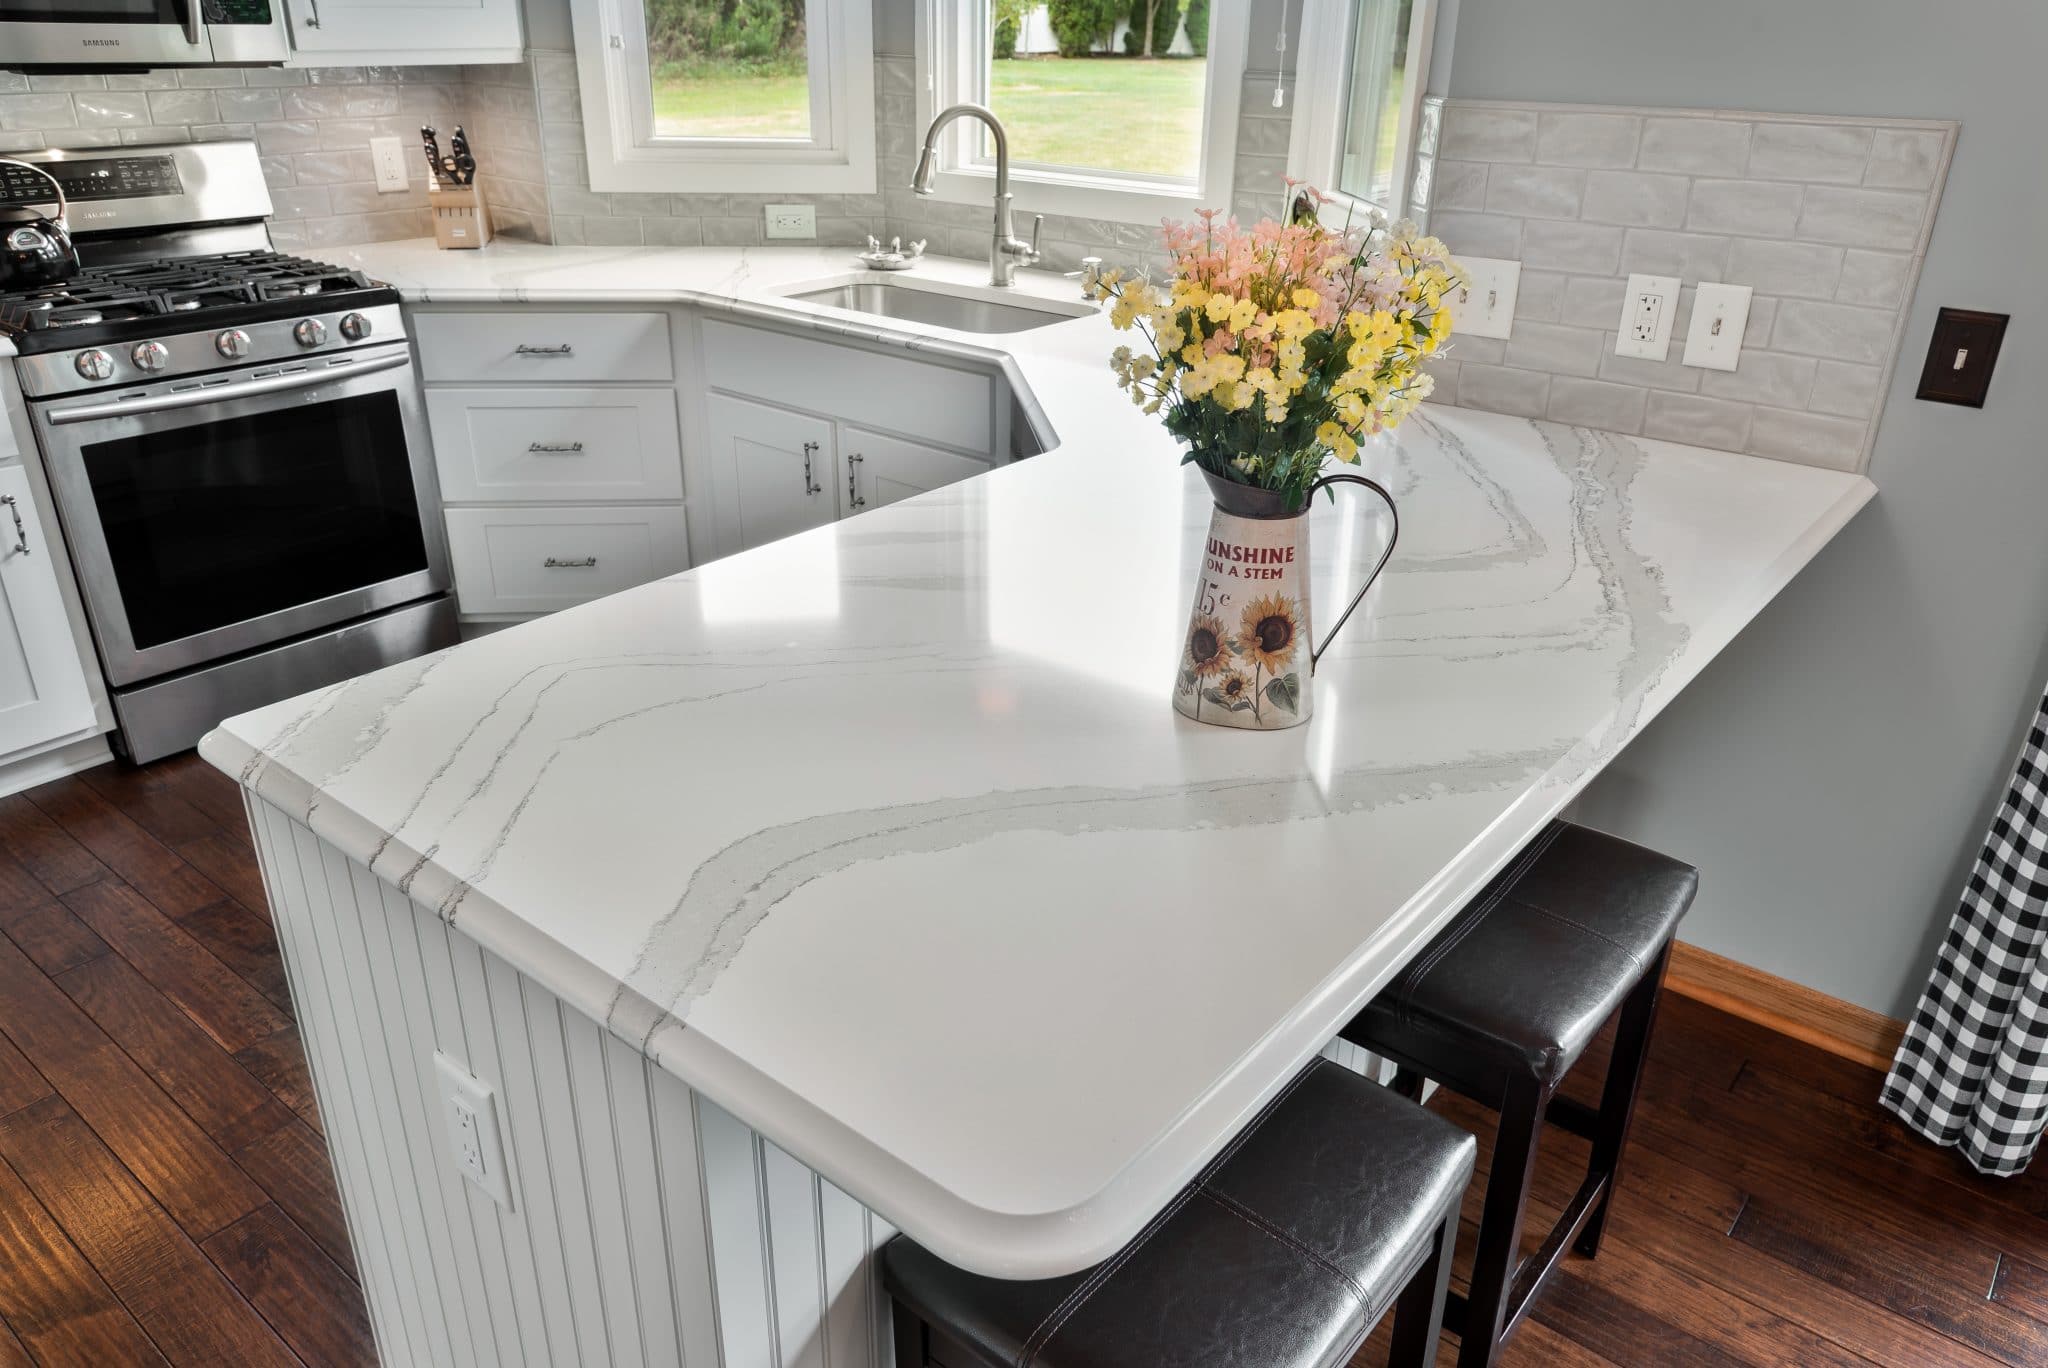 What's the Best Kitchen Countertop Material? - WSJ